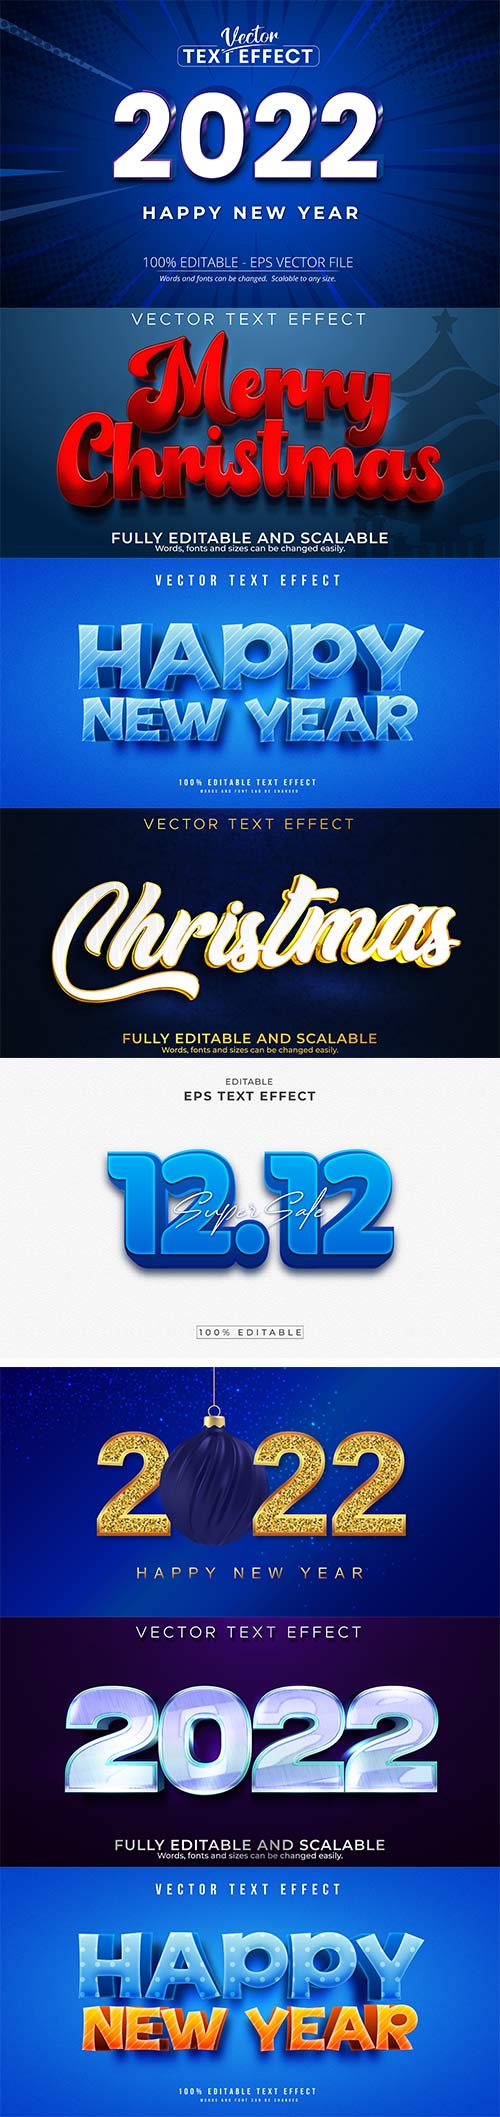 2022 New year and christmas editable text effect vector vol 33